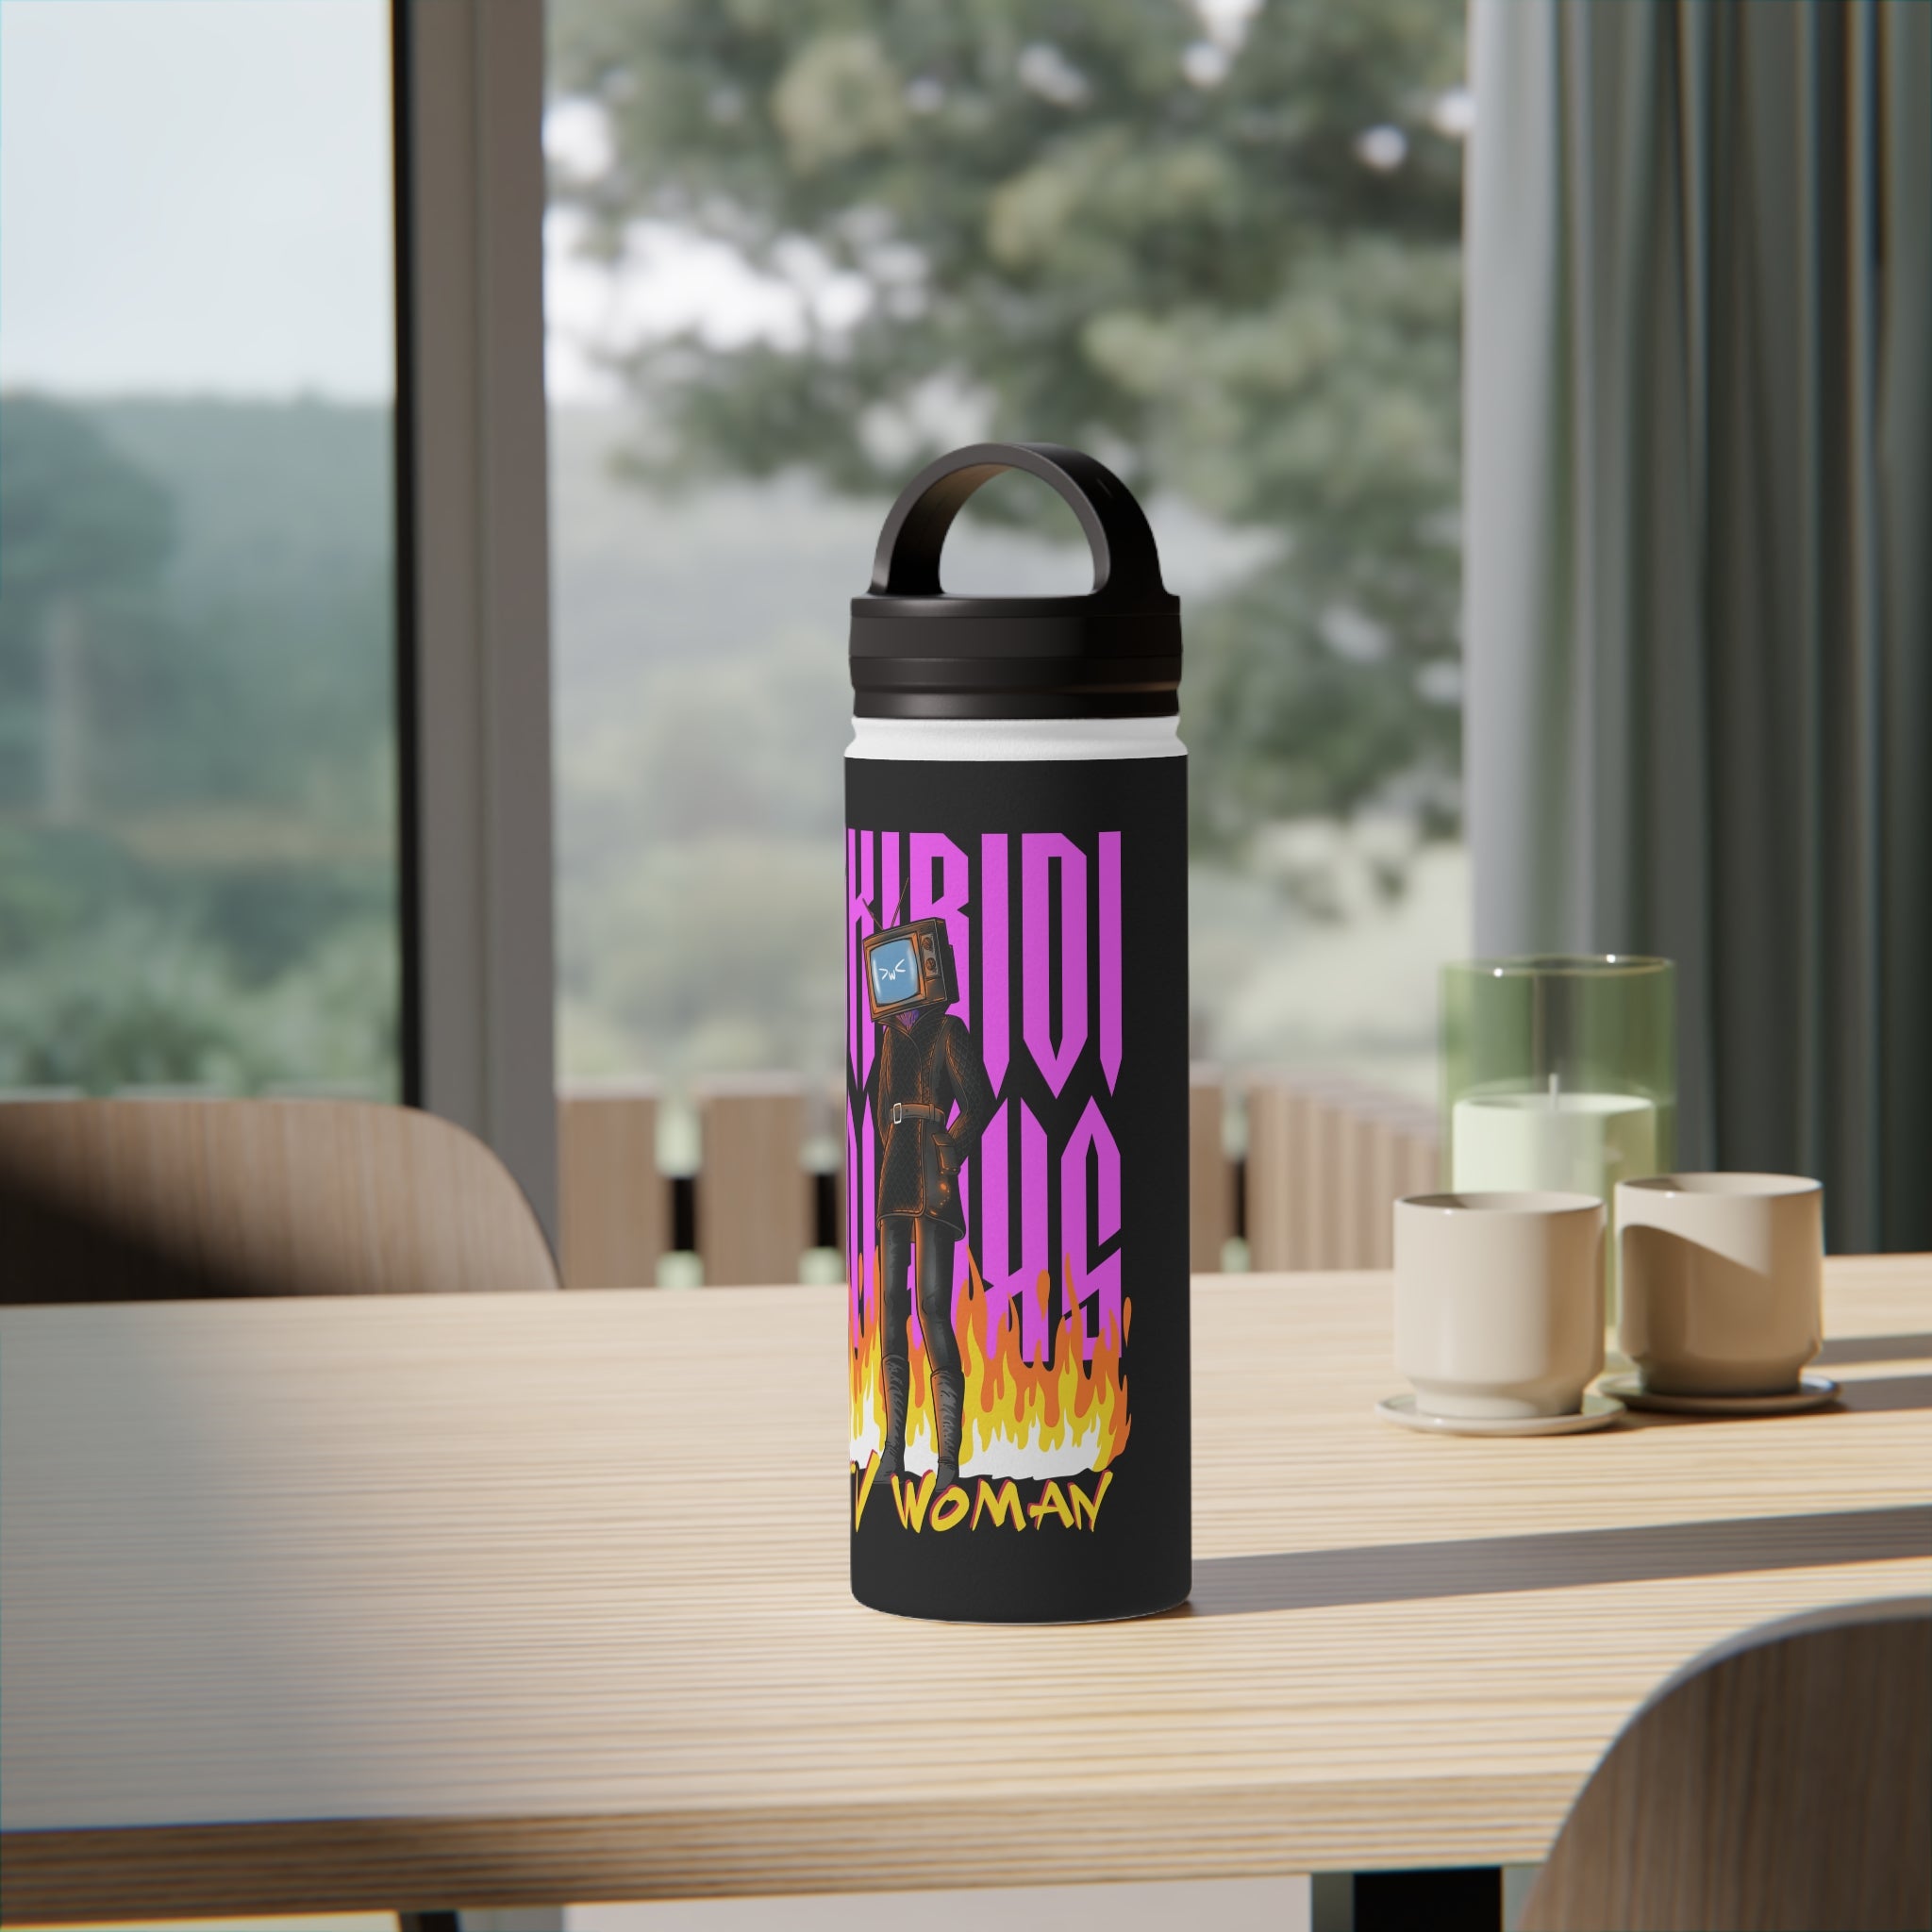 The essence of the brand while ensuring you stay refreshed on the go. Alt Tag: "Black 18oz water bottle with TV Woman artwork from Skibidi